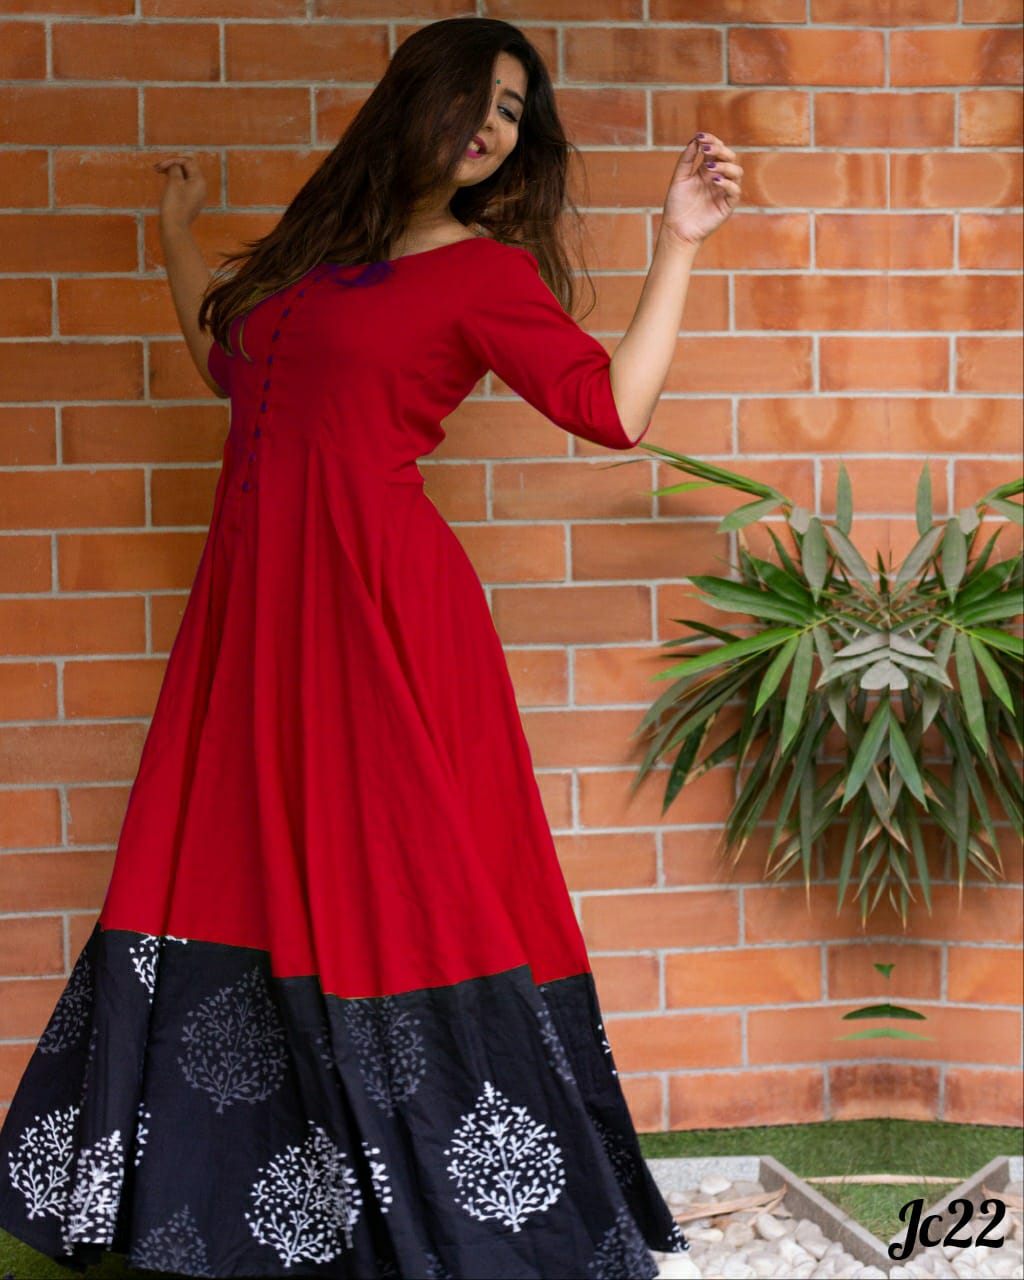 ANARKALI DRESS FULLY STITCHED READYMADE GOWN KURTI SUIT INDIAN NEW LOOK  LD1074 | eBay